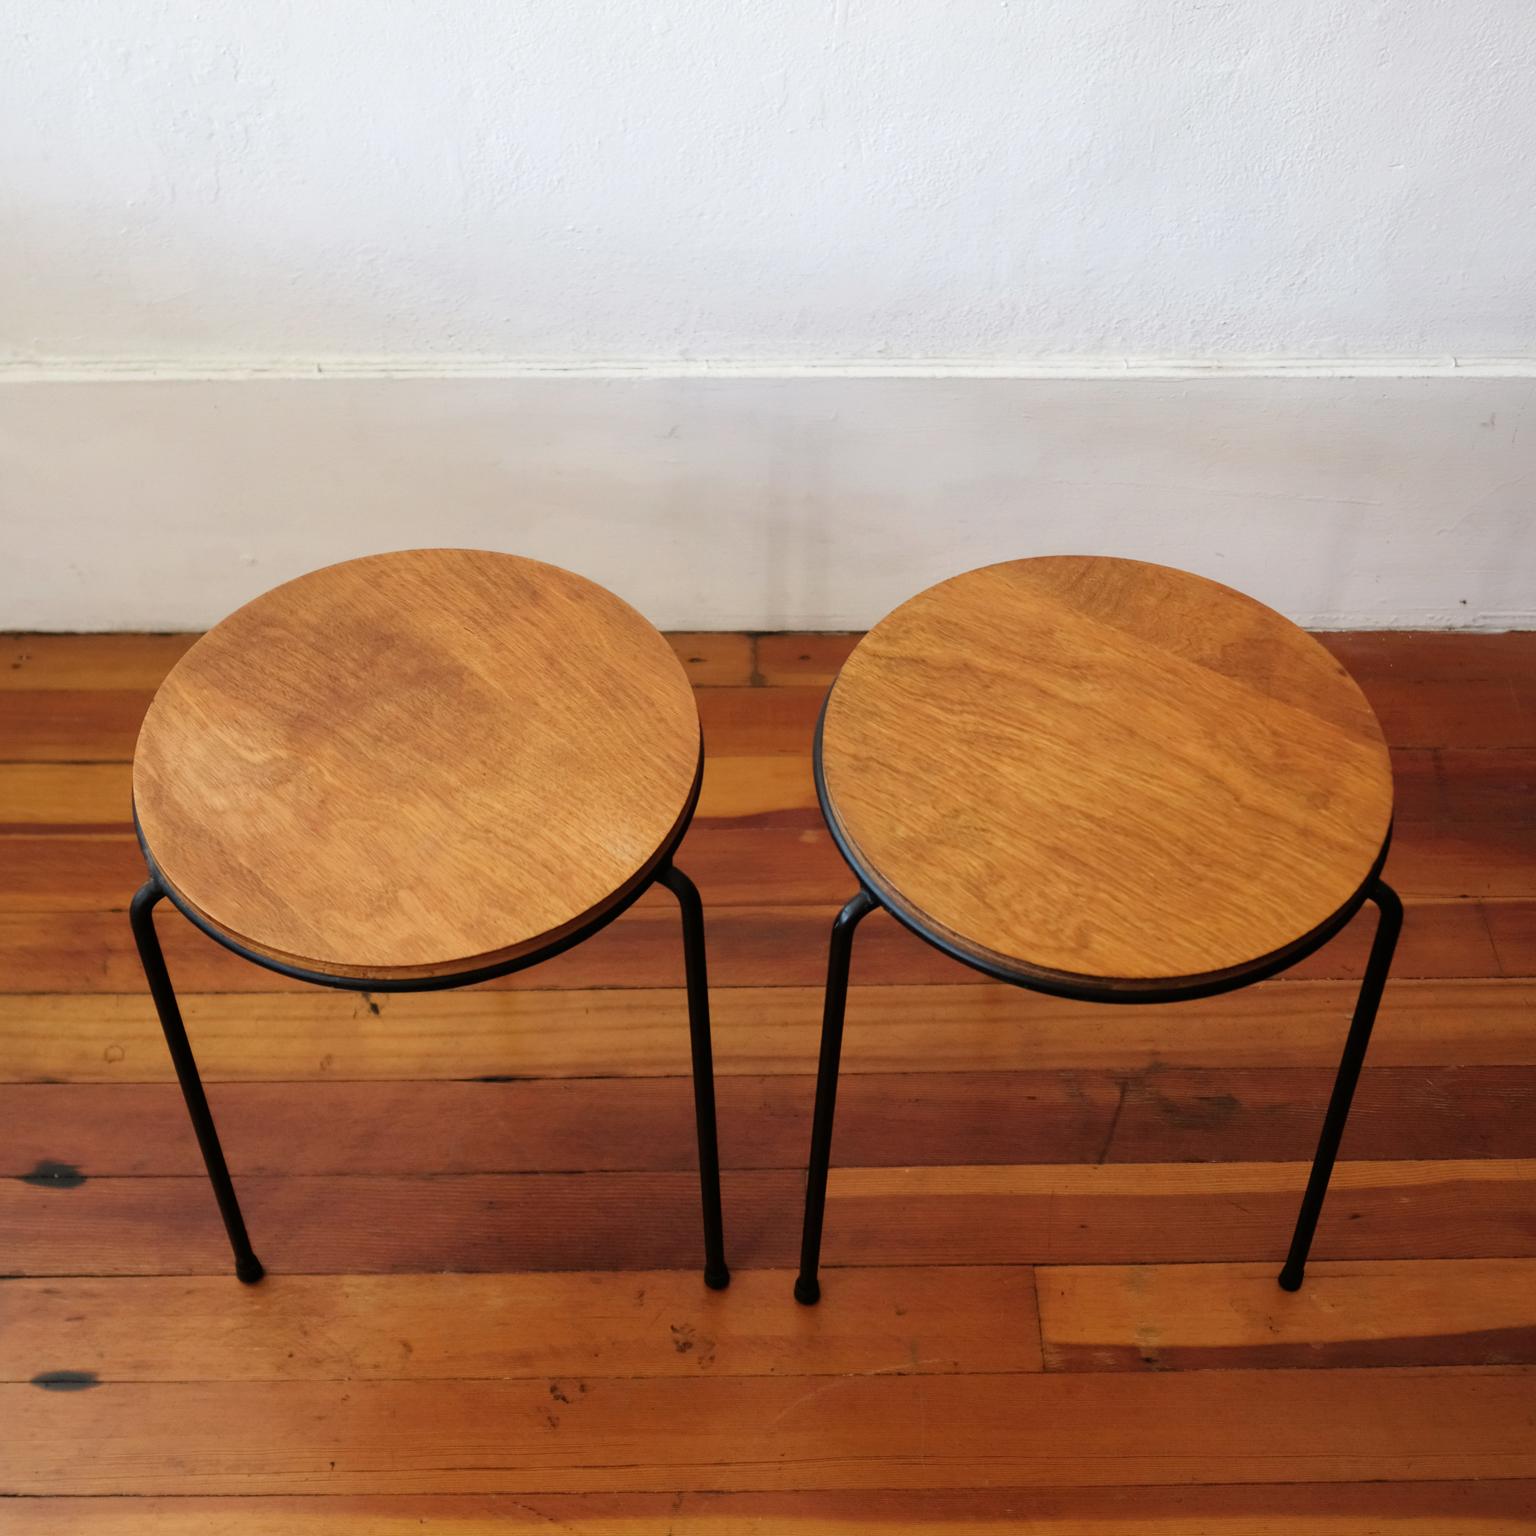 Pair of Iron and Walnut Tables or Stools, 1950s In Good Condition For Sale In San Diego, CA